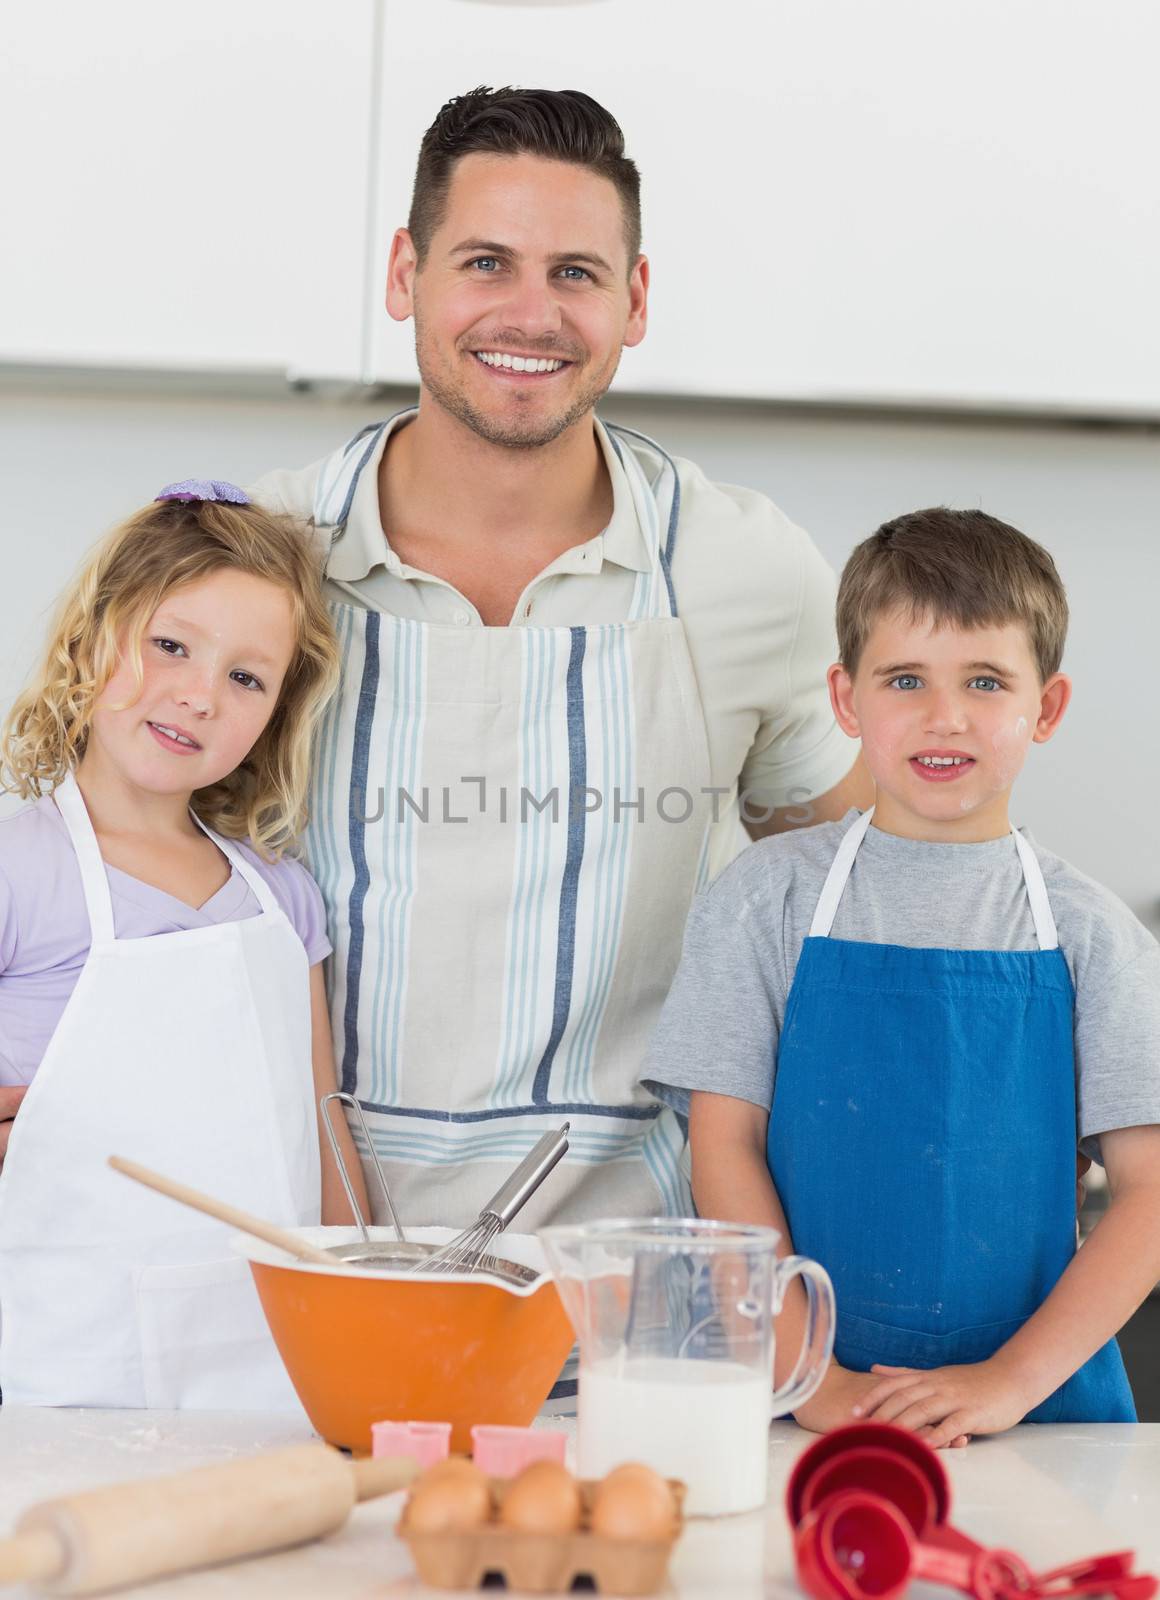 Portrait of family in aprons smiling while baking cookies